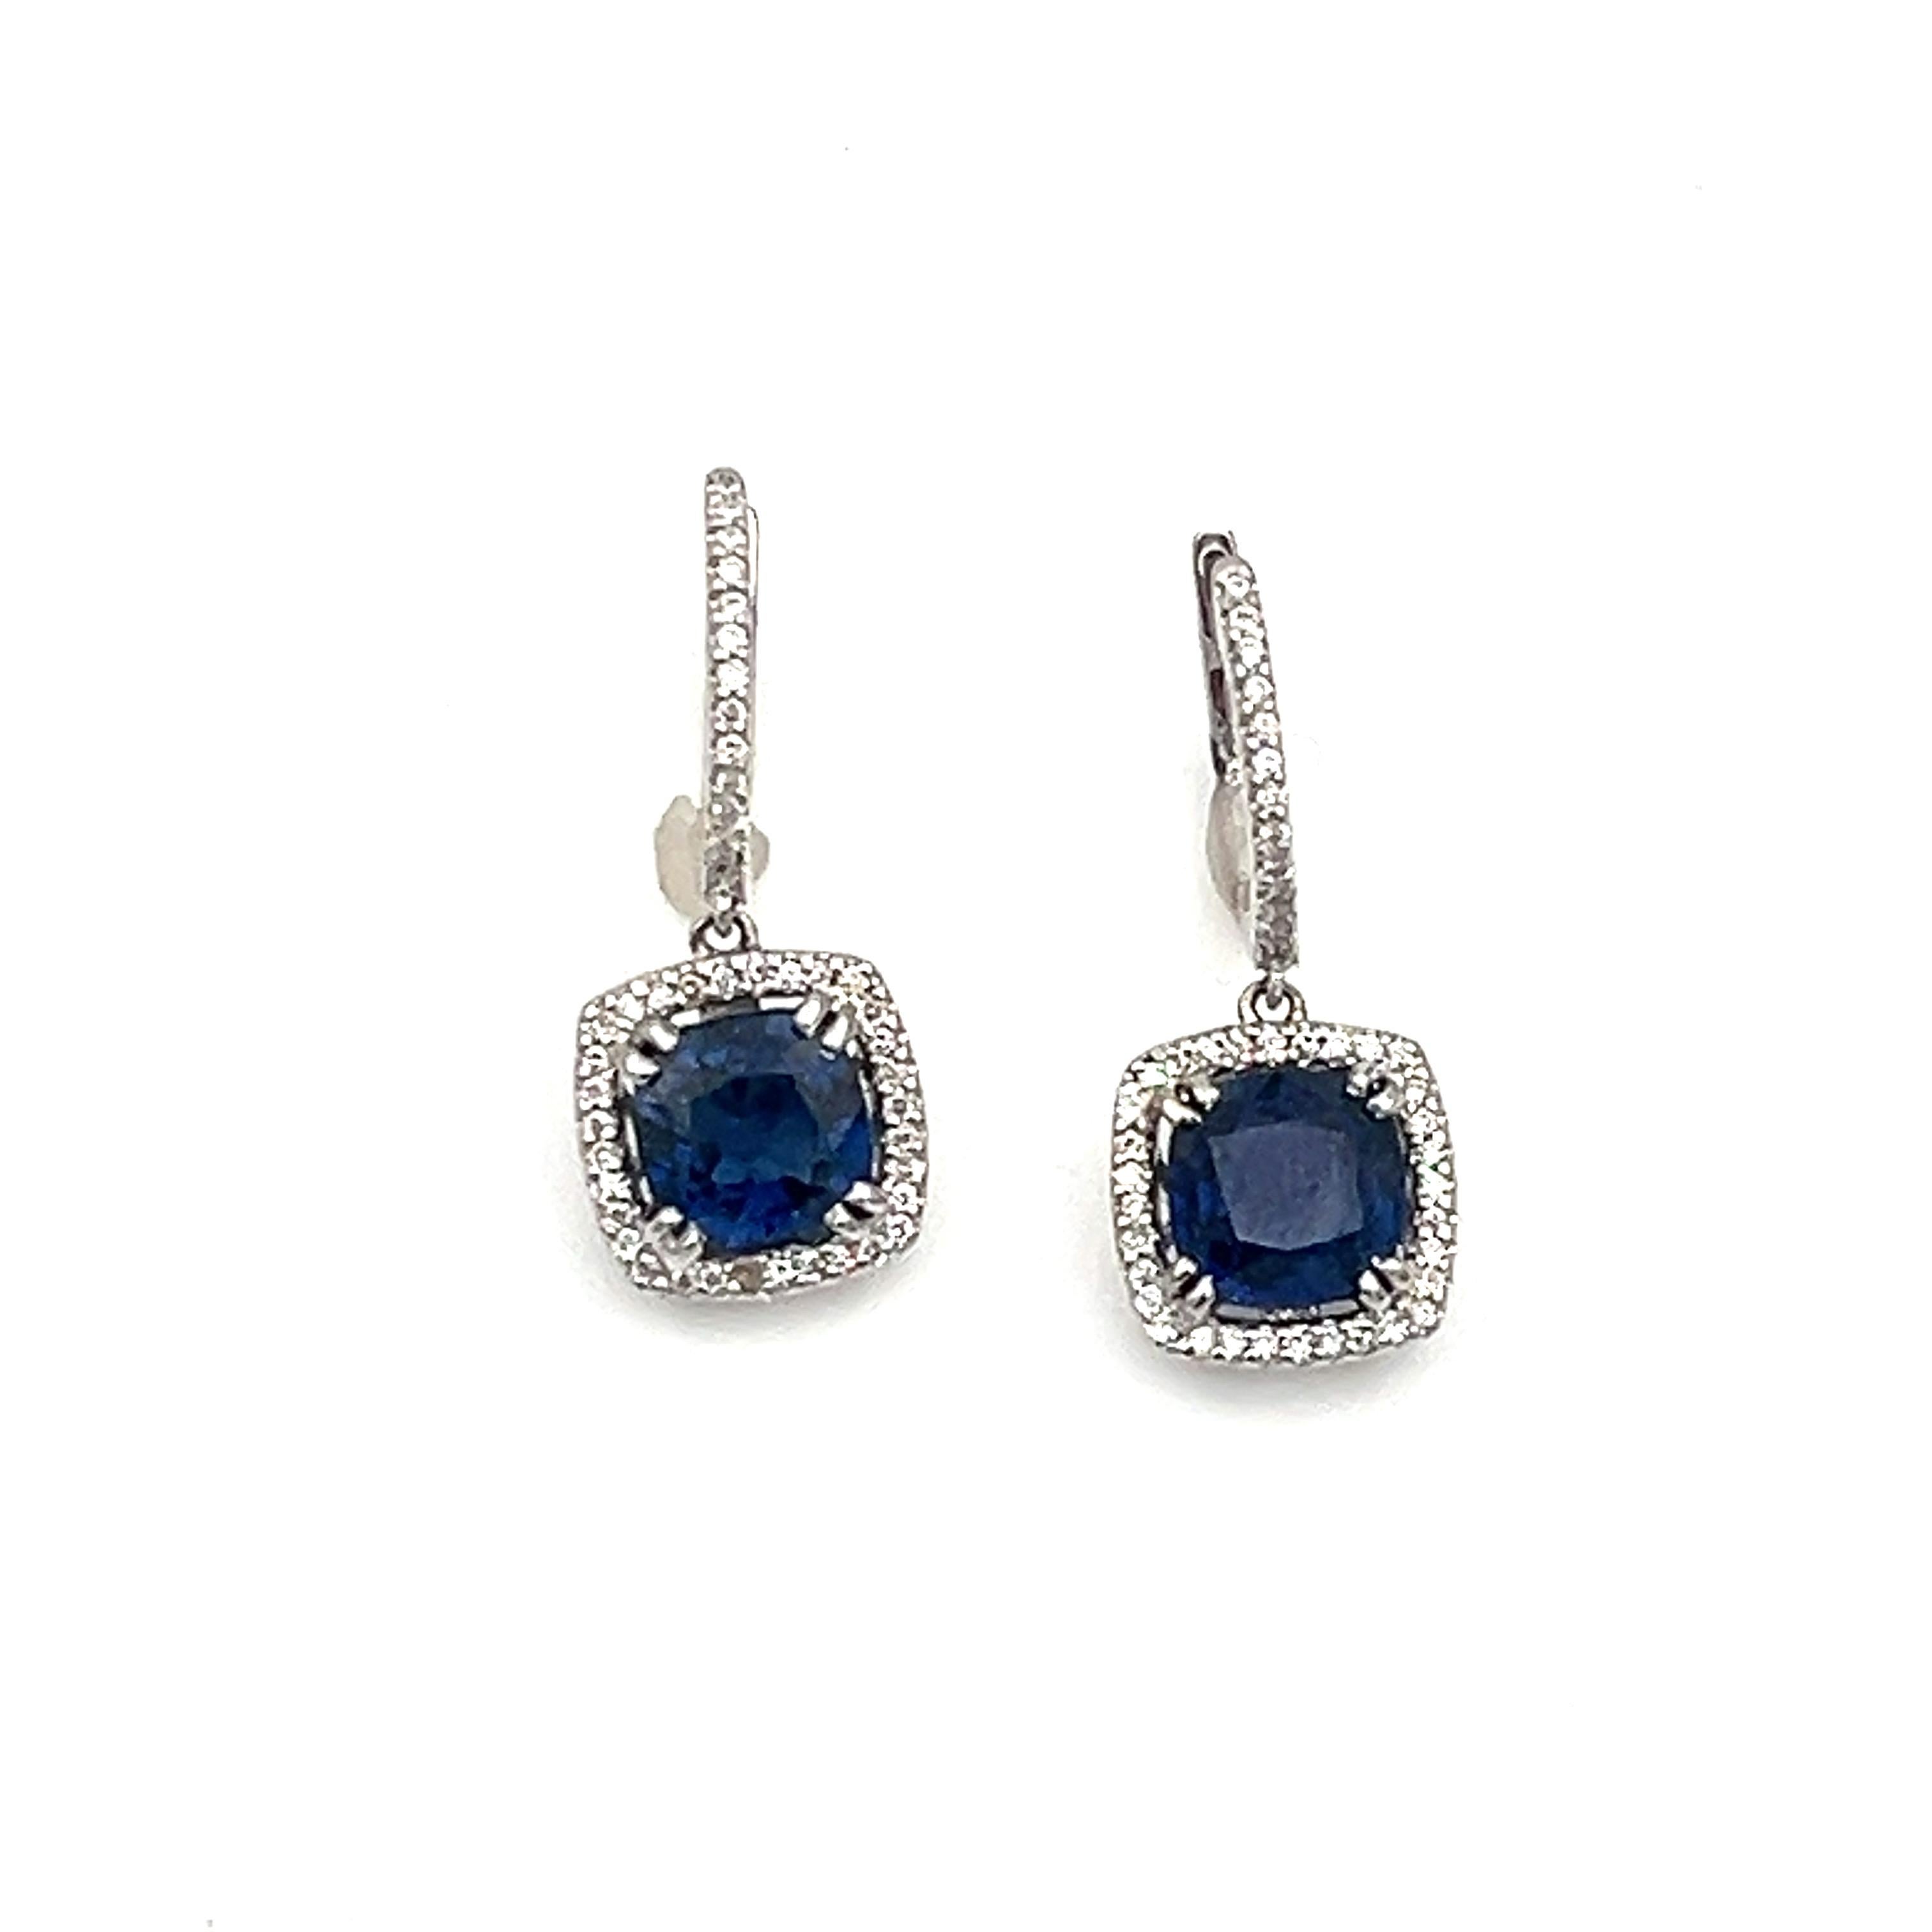 These gorgeous natural heat treated sapphires and diamond earrings will complete any wardrobe. 3.71 total carats, the diamonds surrounding the natural sapphire are a F/G in color with a VS2/SI1 in clarity.